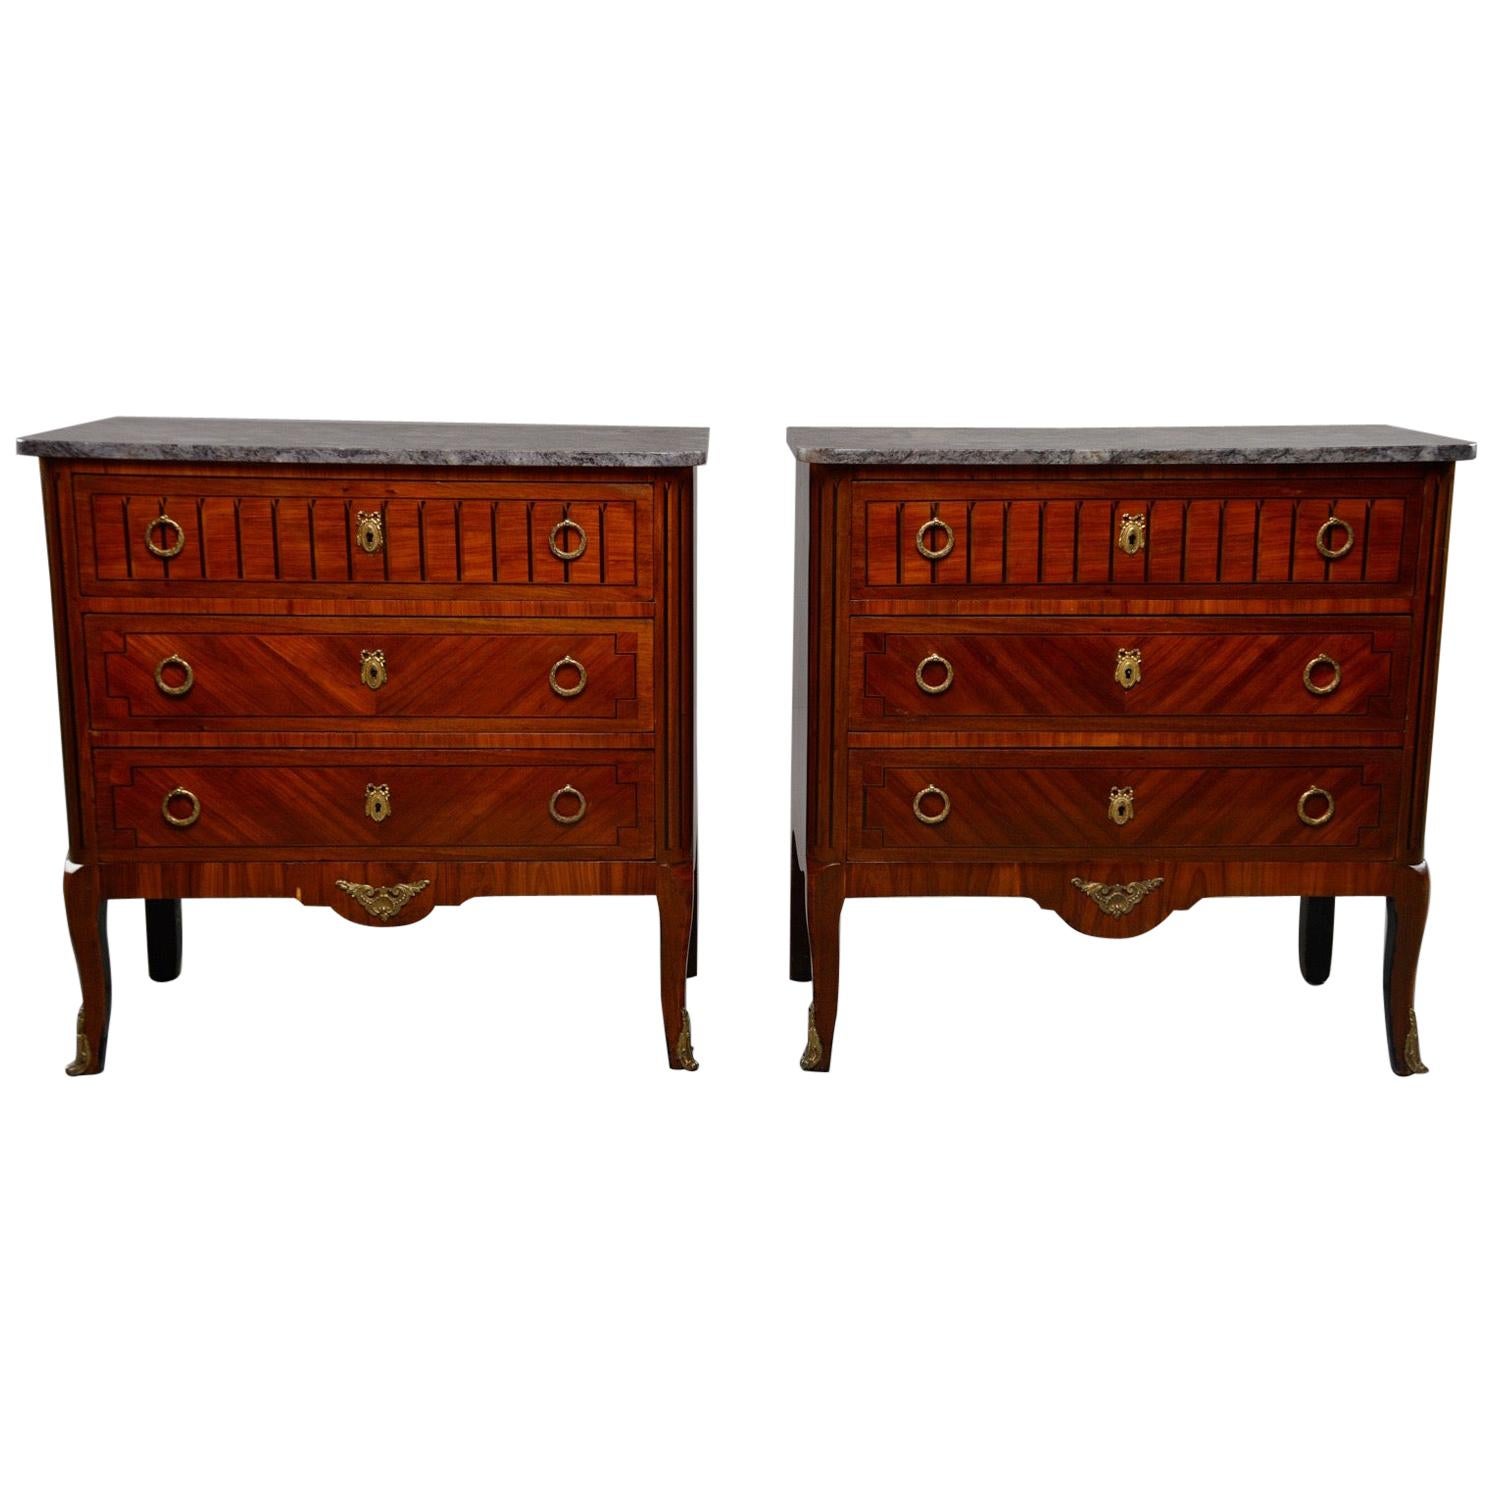 Pair of Louis XVI Style Mahogany Chests with Marble Tops